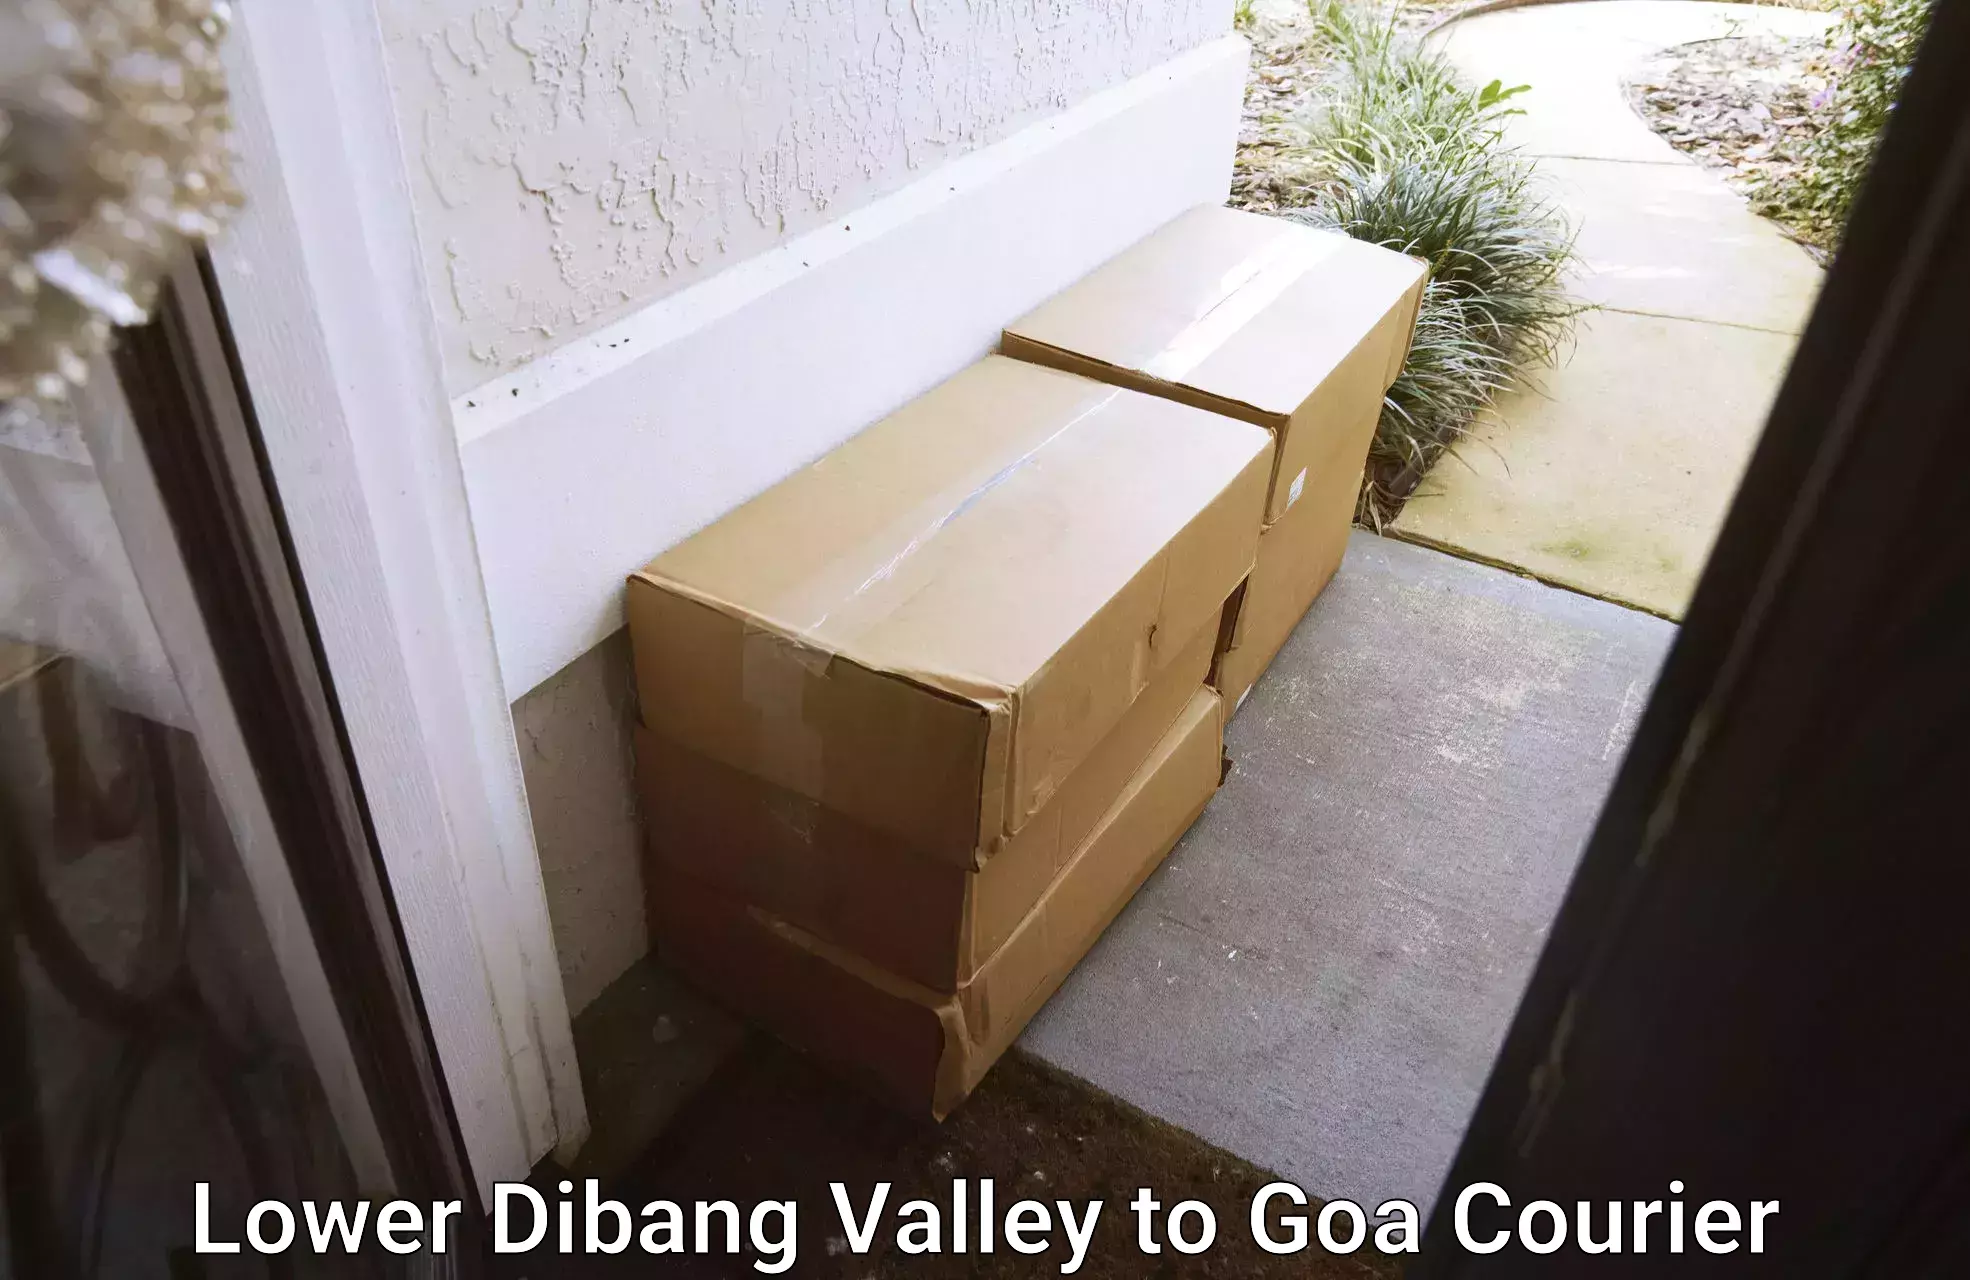 Courier service booking Lower Dibang Valley to Ponda